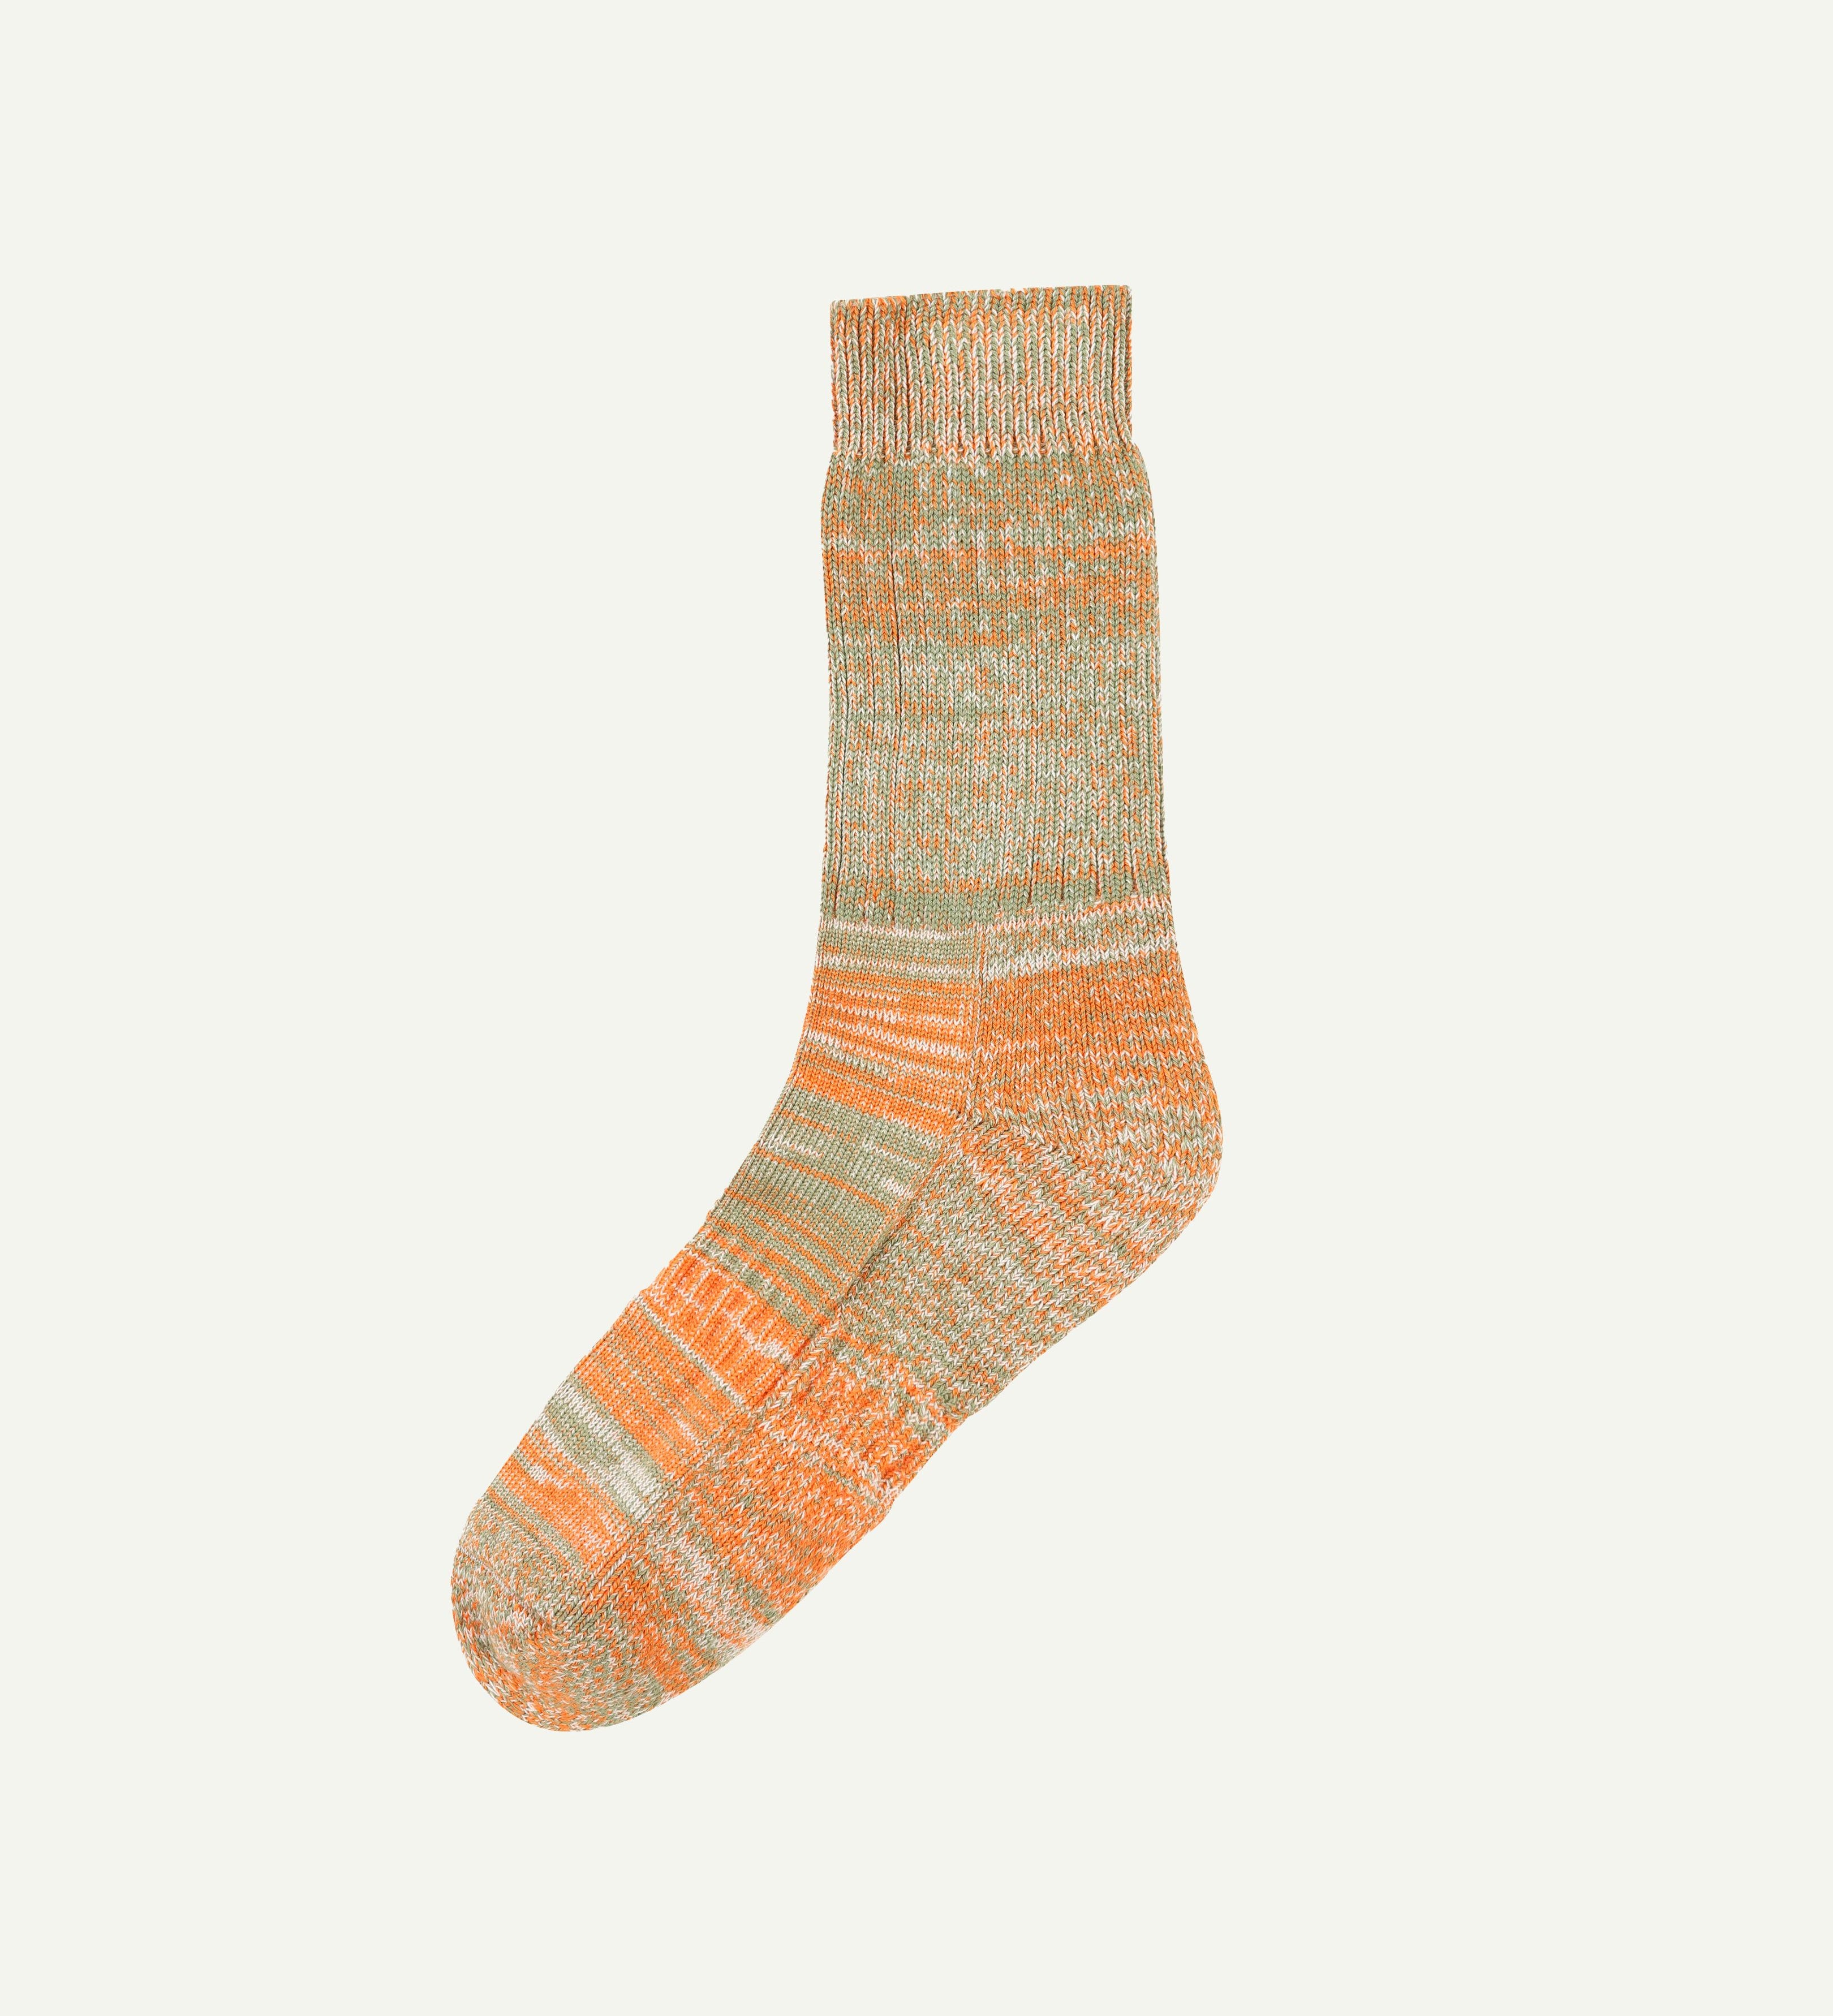 Uskees socks | organic cotton socks knitted in Scotland